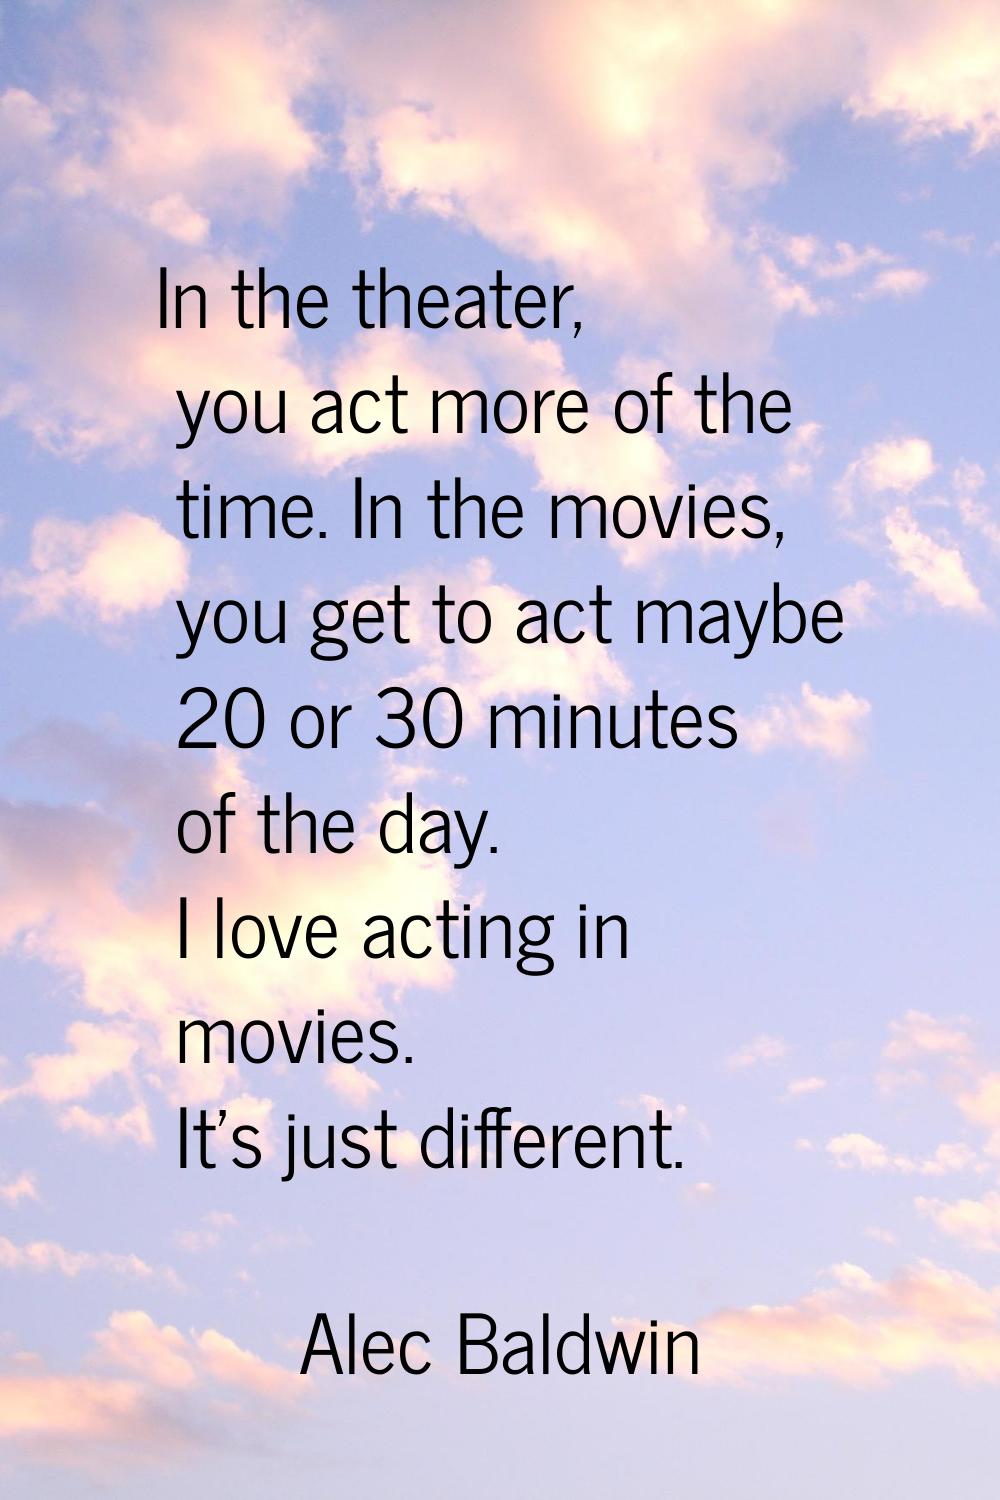 In the theater, you act more of the time. In the movies, you get to act maybe 20 or 30 minutes of t